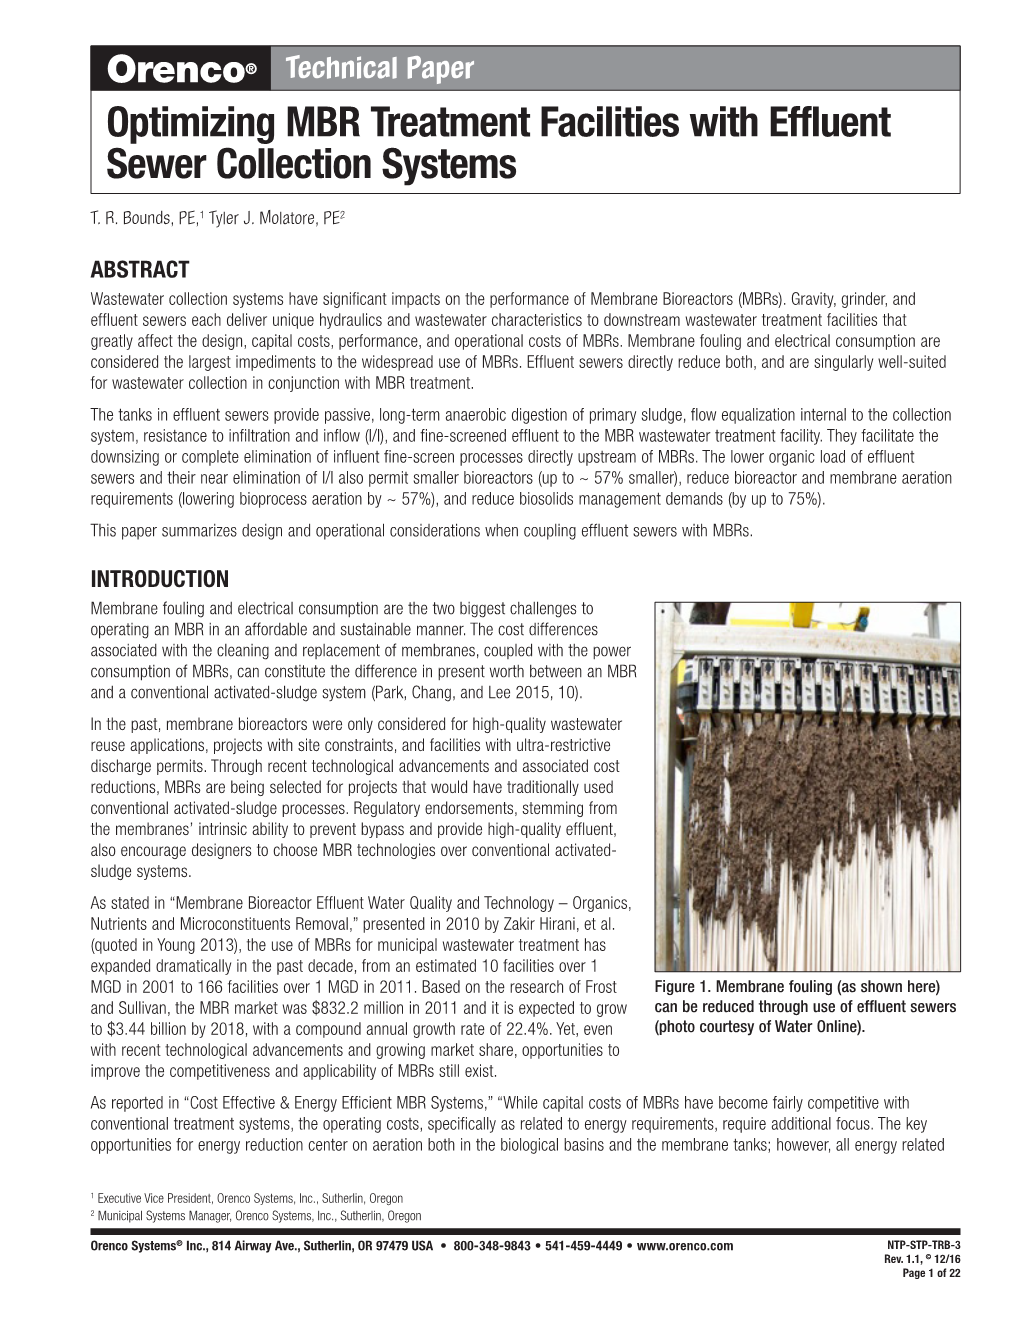 Optimizing MBR Treatment Facilities with Effluent Sewer Collection Systems